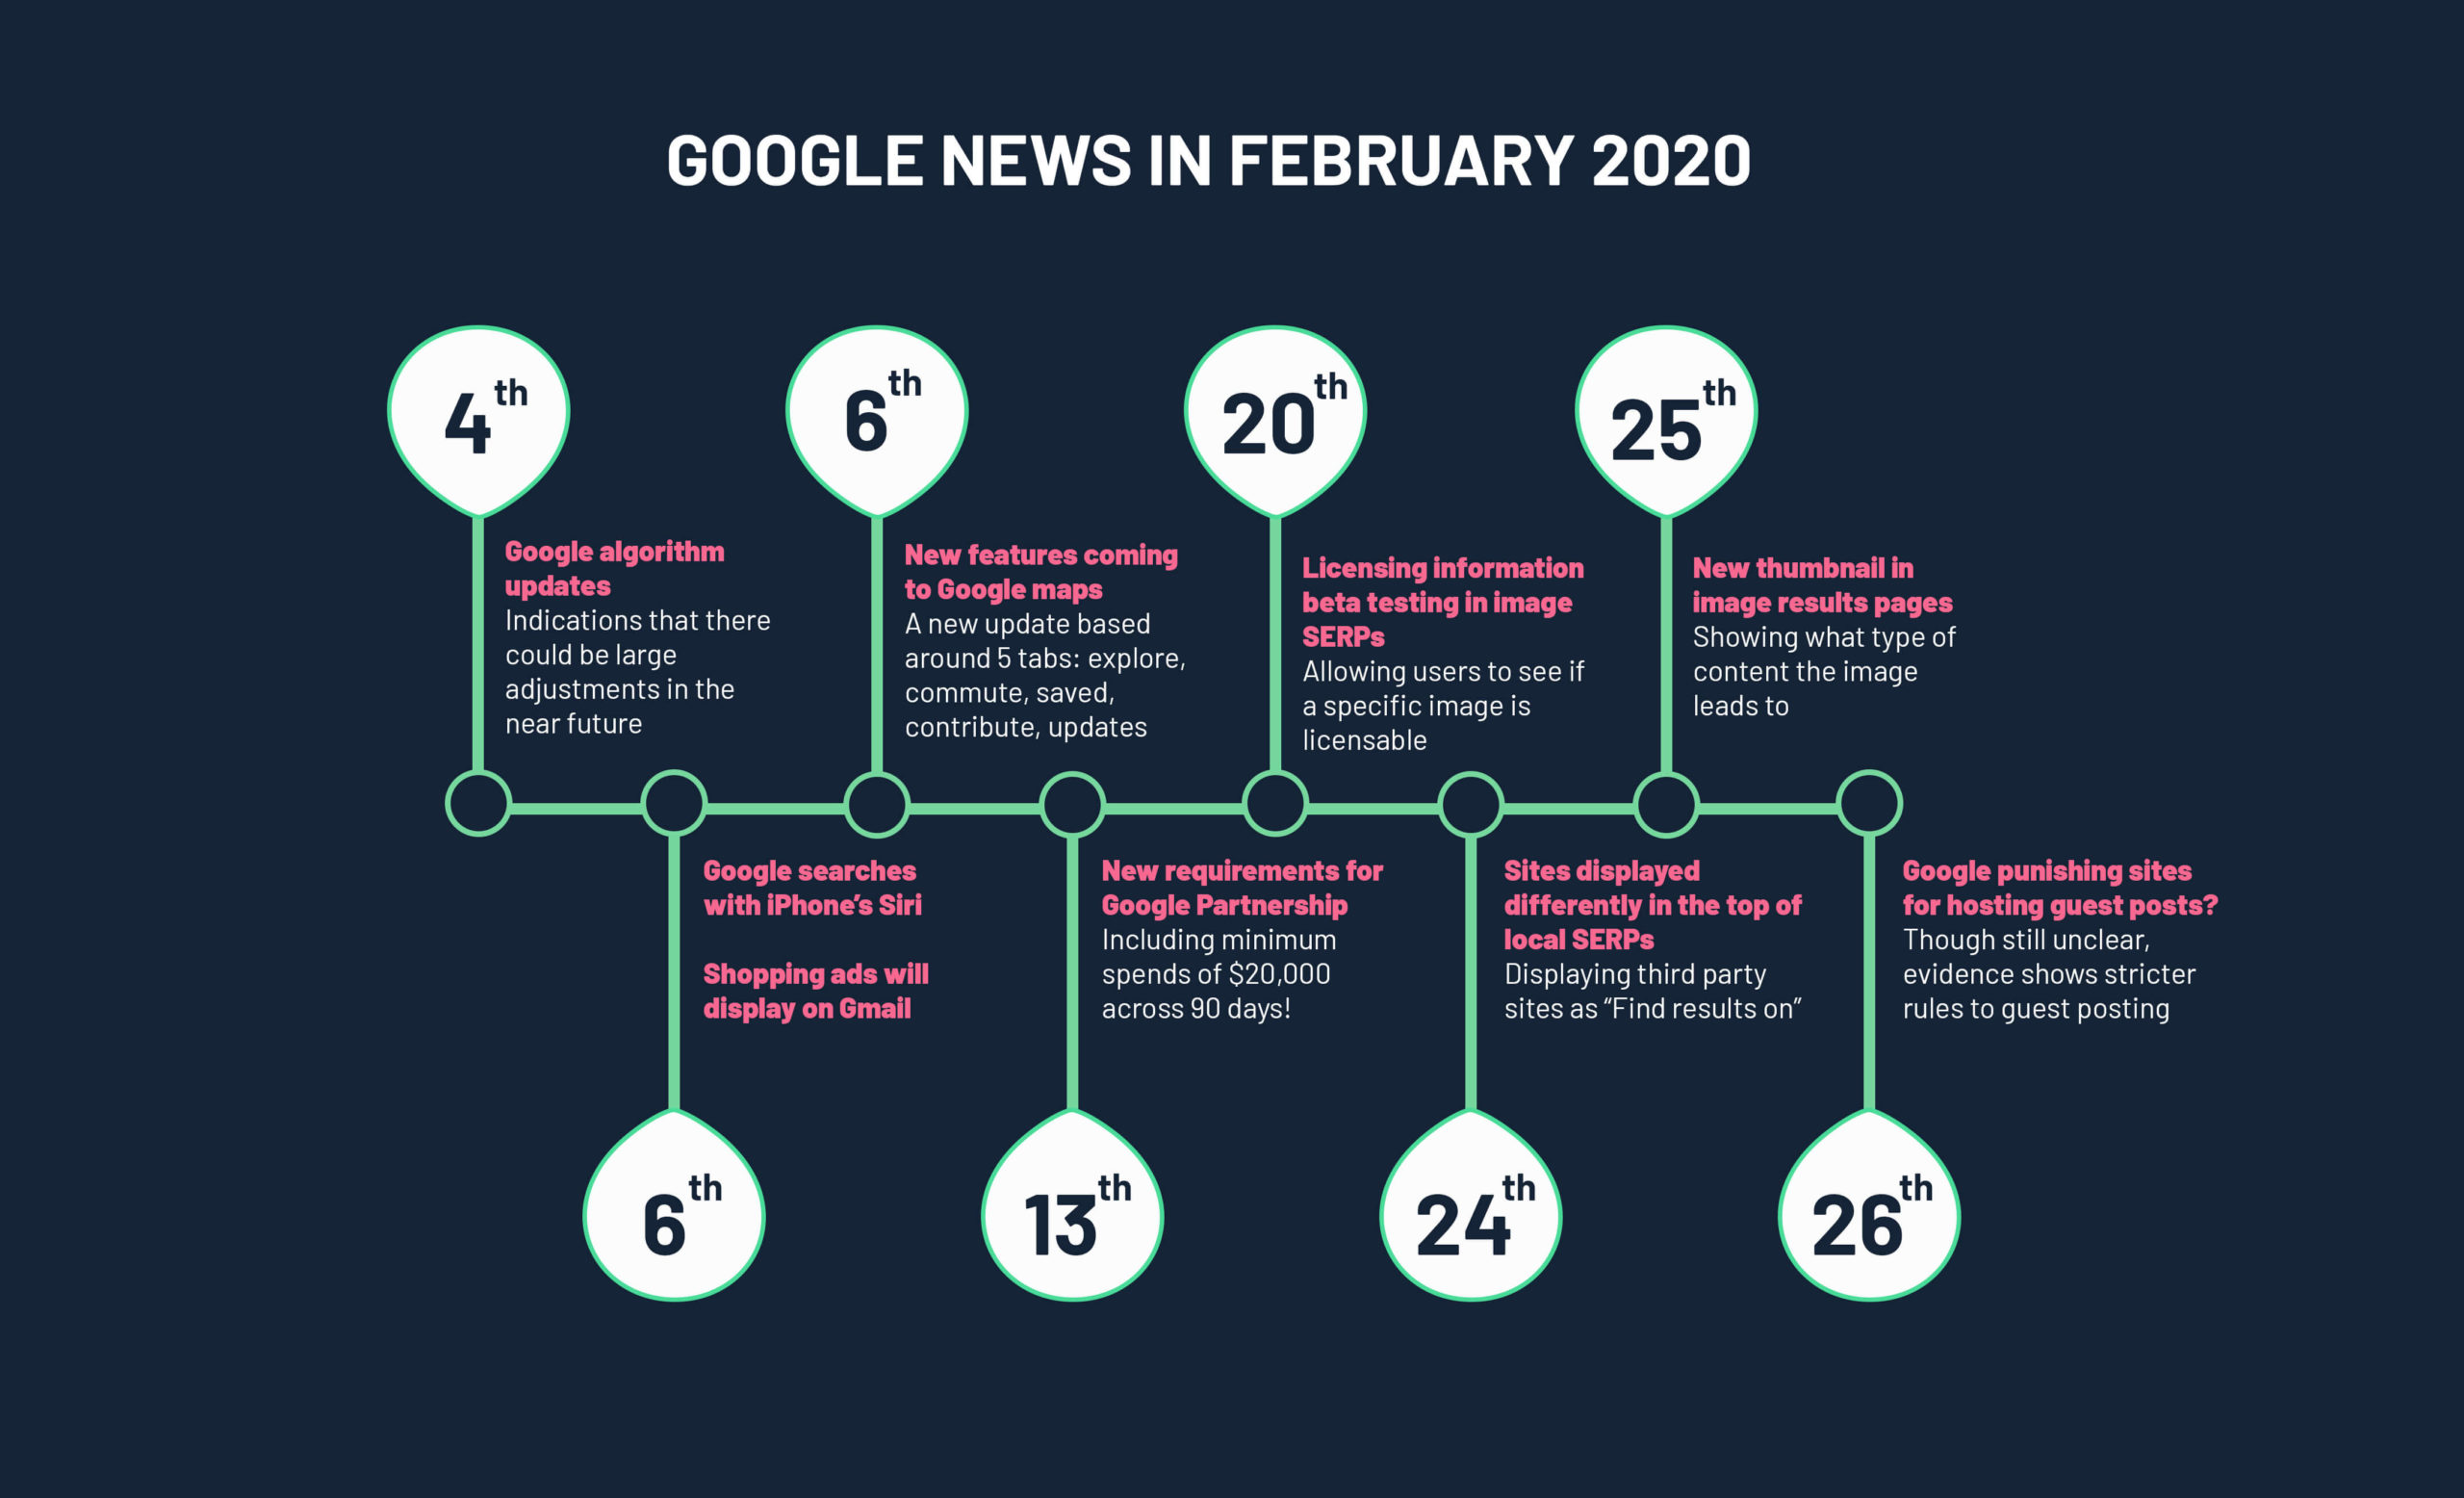 infographic showing a timeline of google updates in February 2020